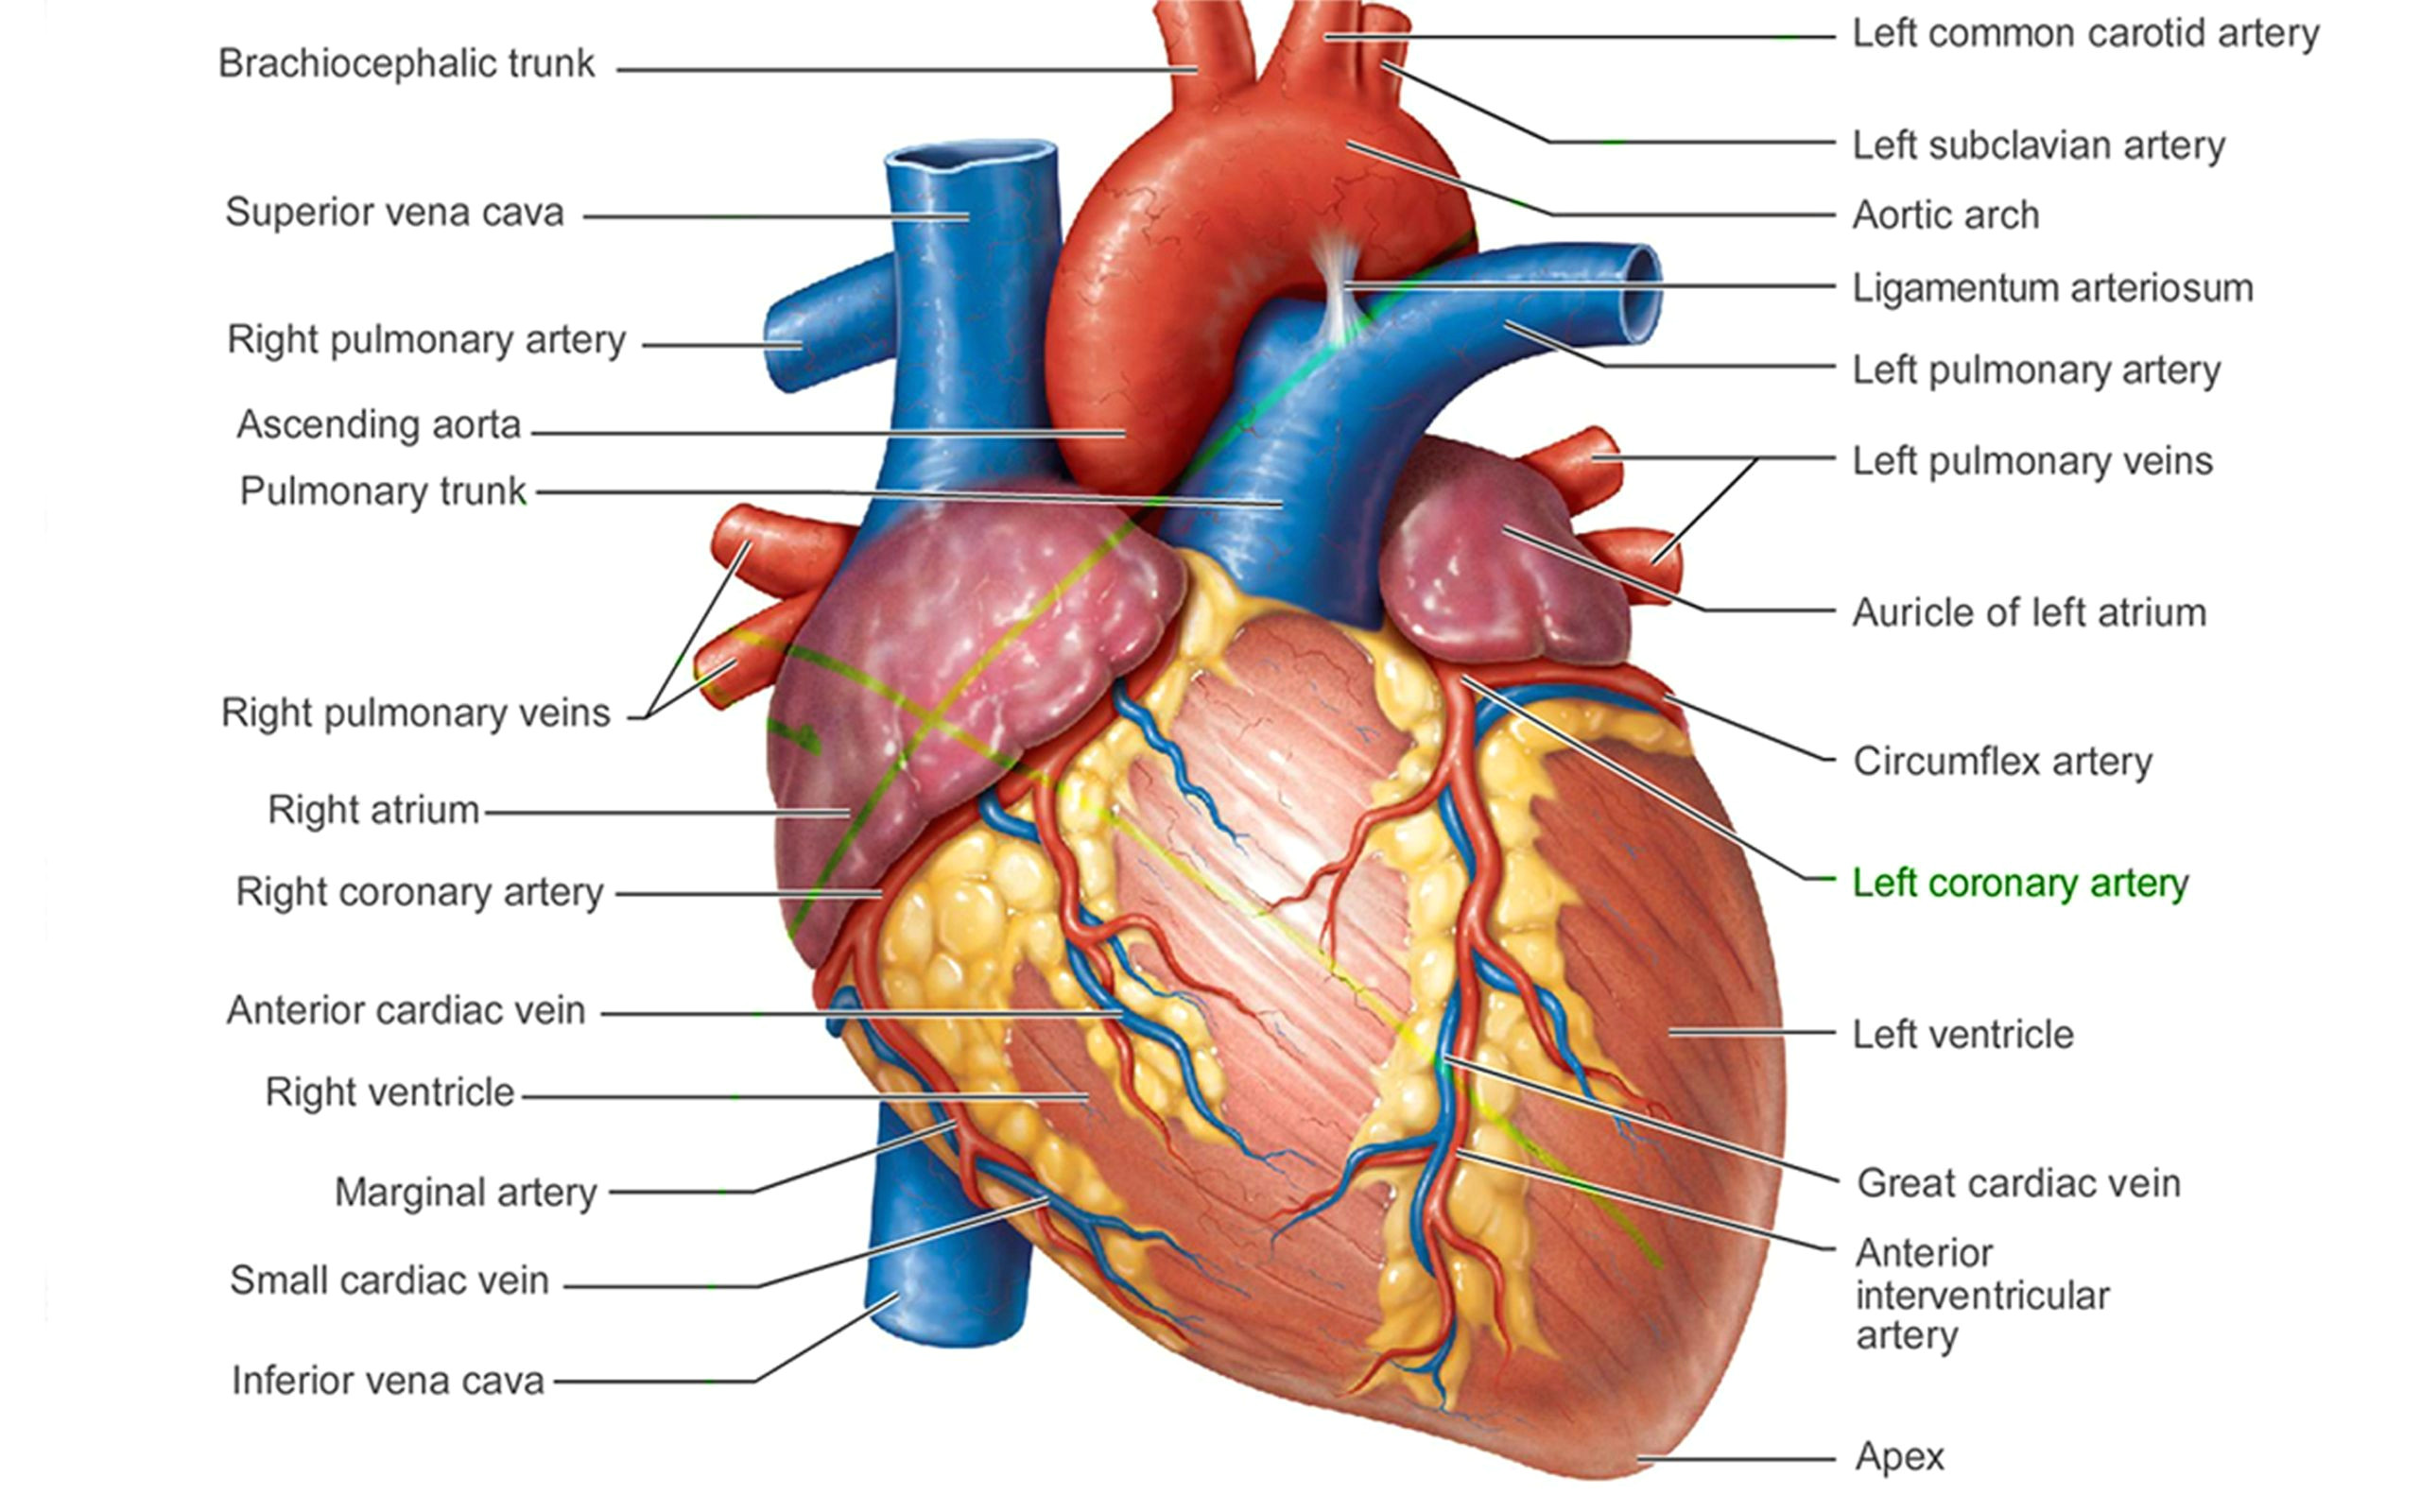 Drawing Of A Heart organ Pictures Of Human Heart Anatomy Anatomy Of the Human Heart 4k Ultra